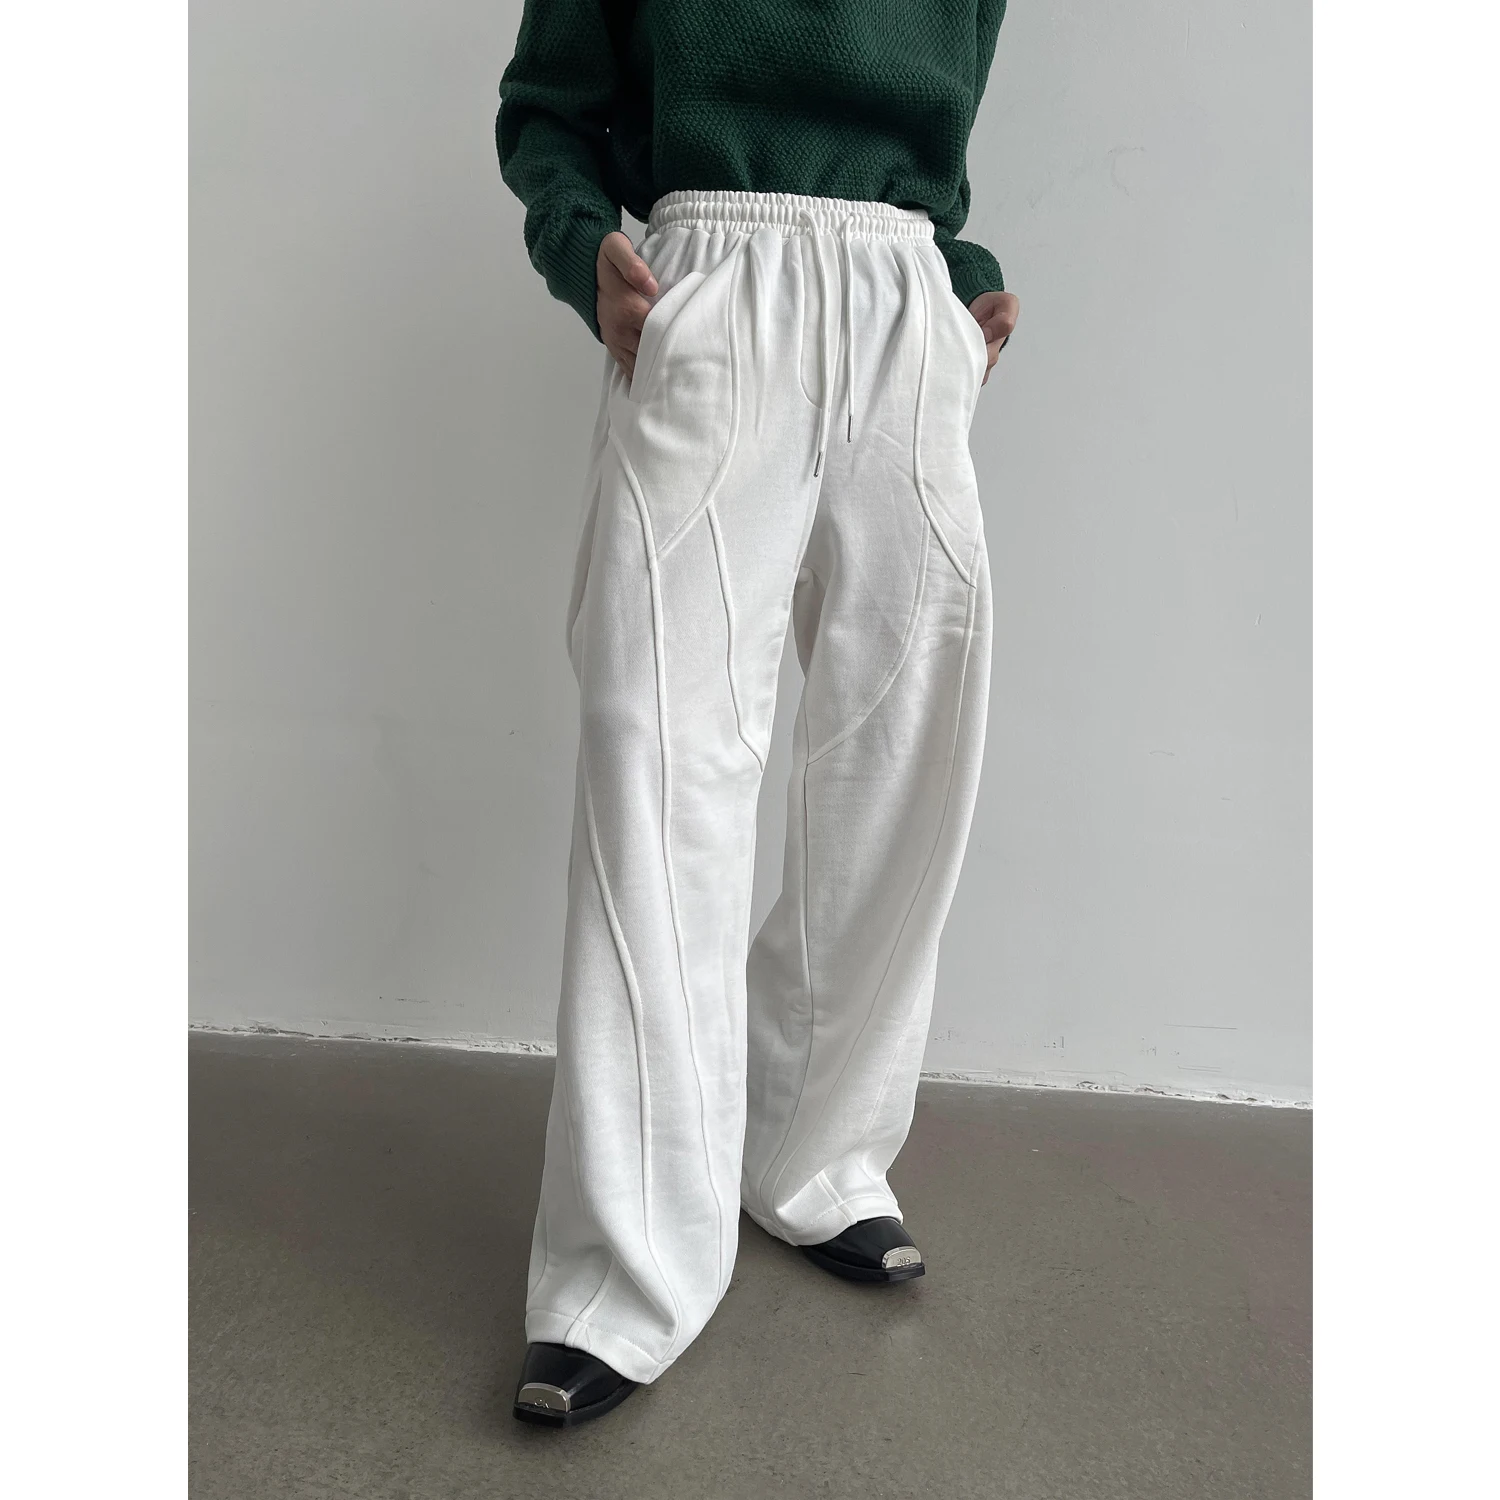 2022 New Men Women Clothing Niche Original Irregular Structure Cut Loose Straight Pants Casual Trousers Plus Size Costumes 27-46